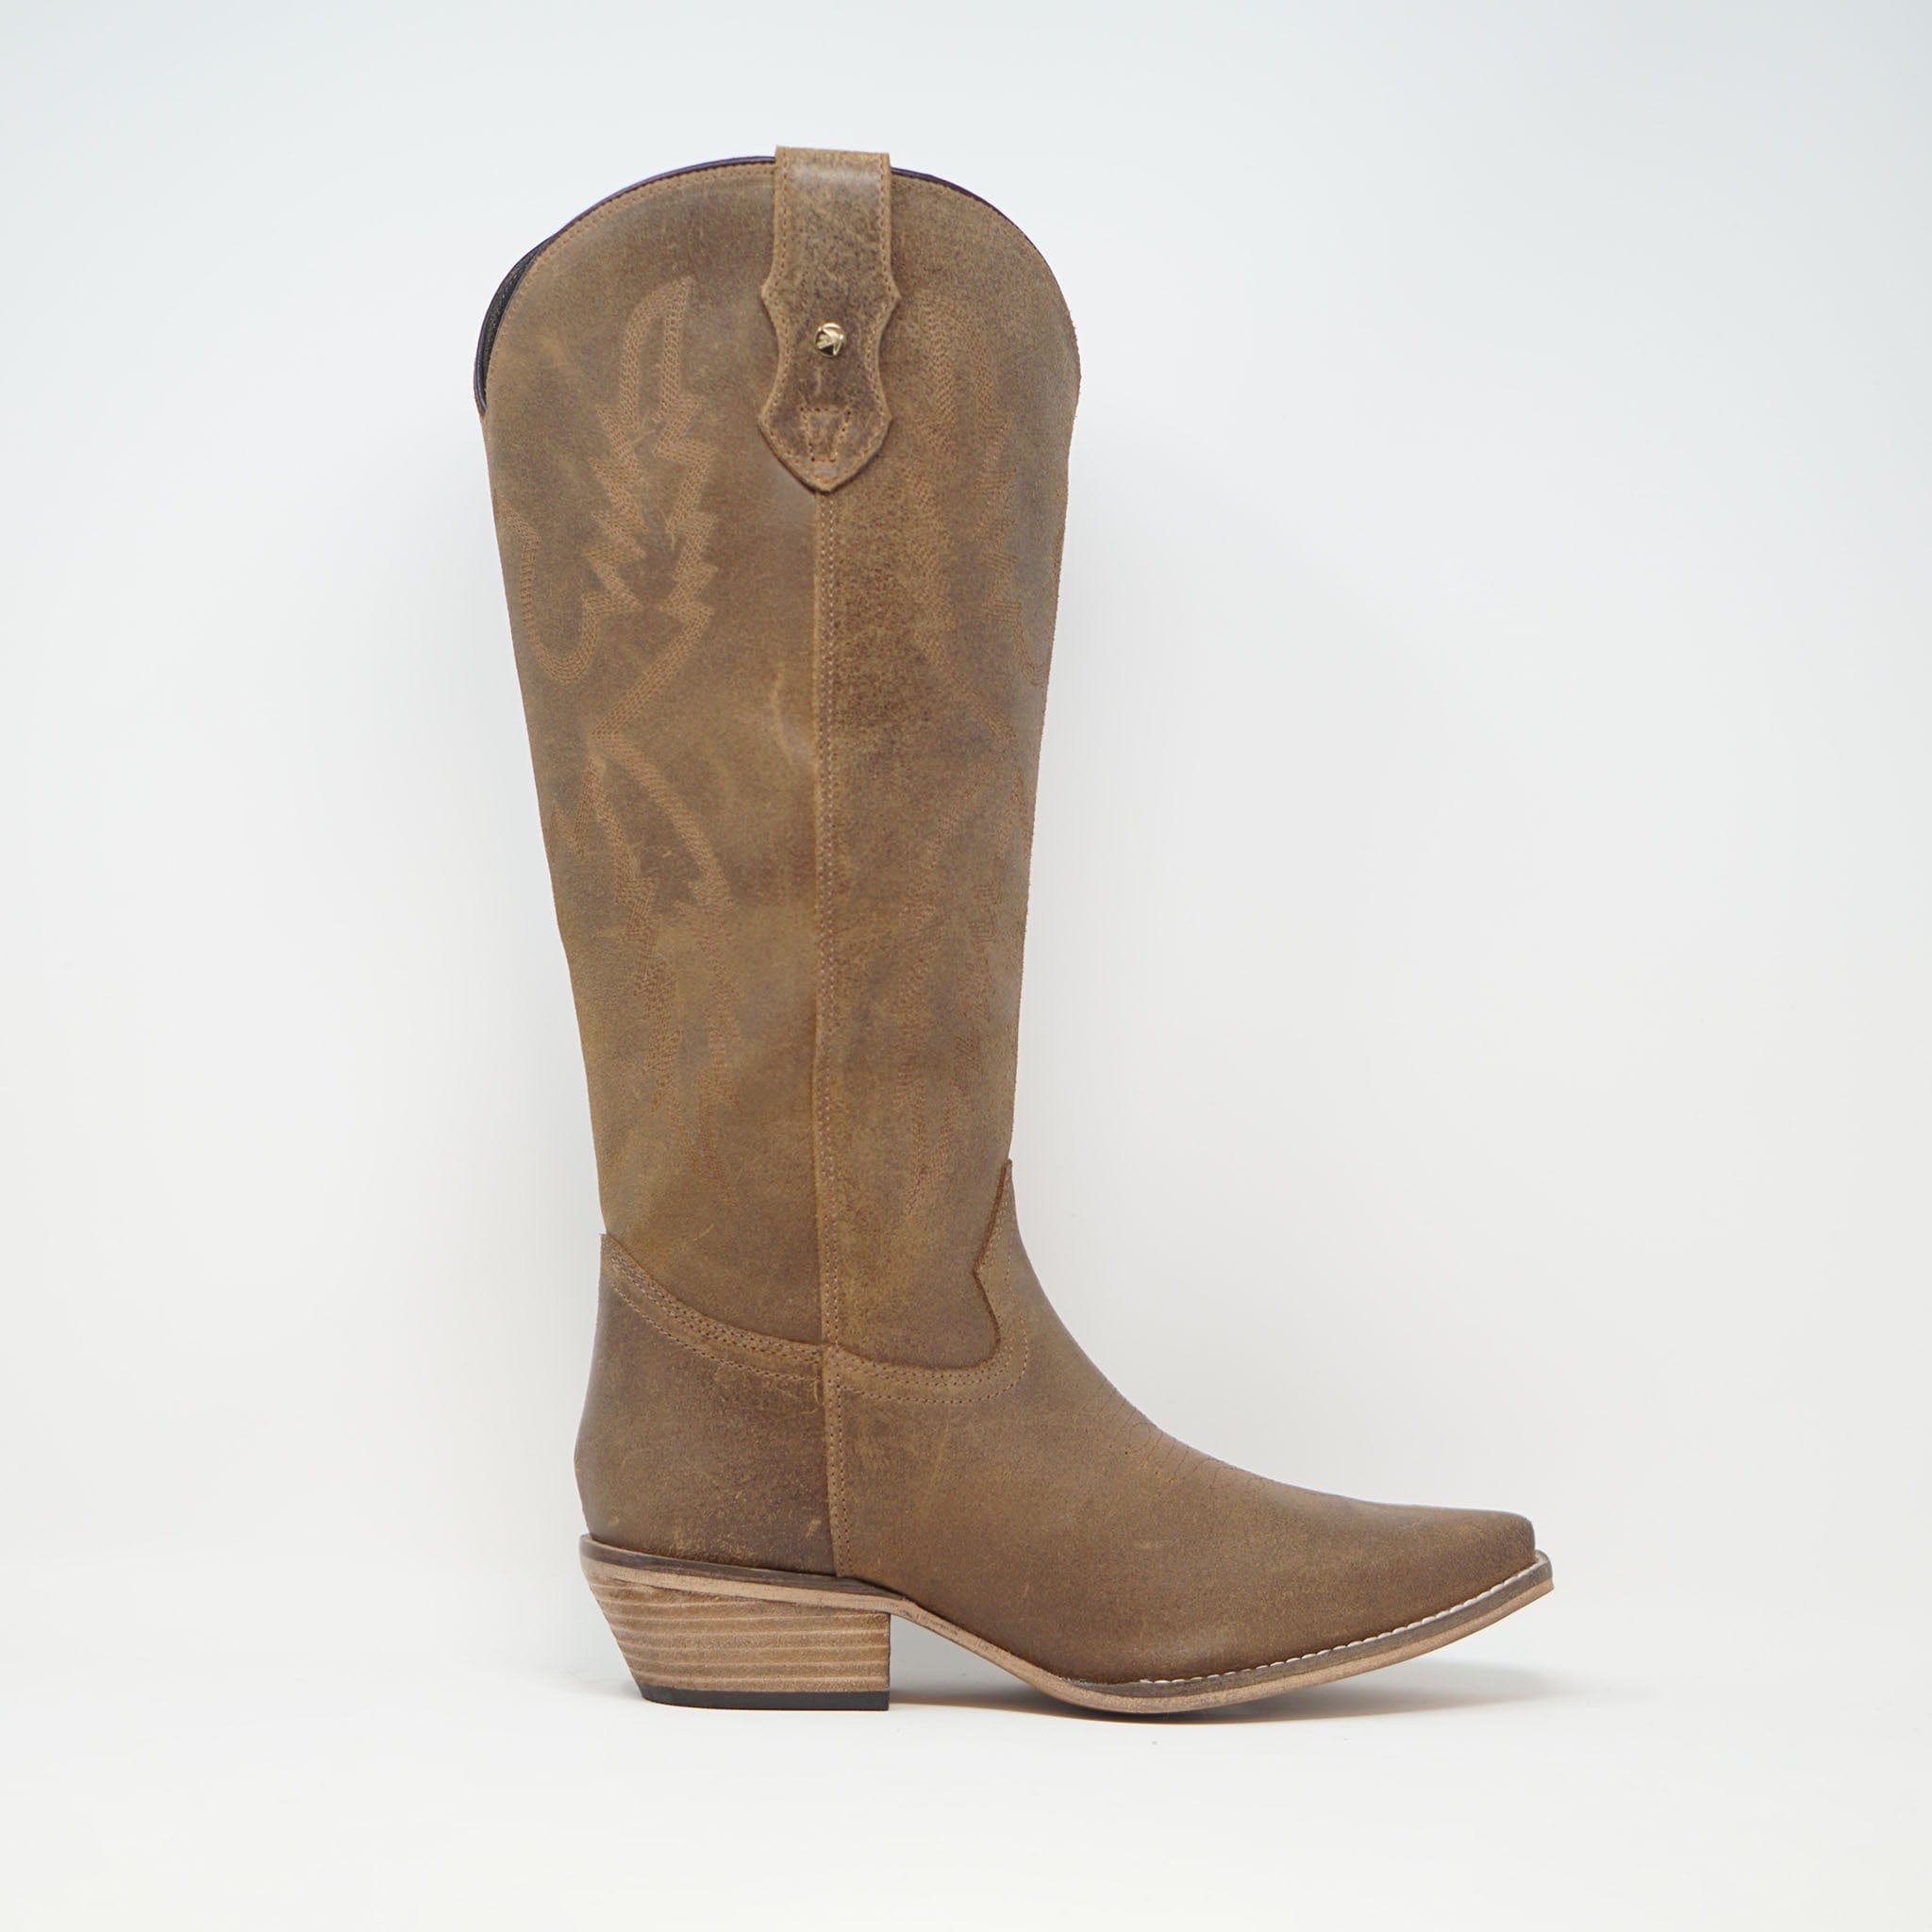 Ravel Dolly Cognac Leather Mid Calf Cowboy Boots BOOTS  - ZIGZAG Footwear